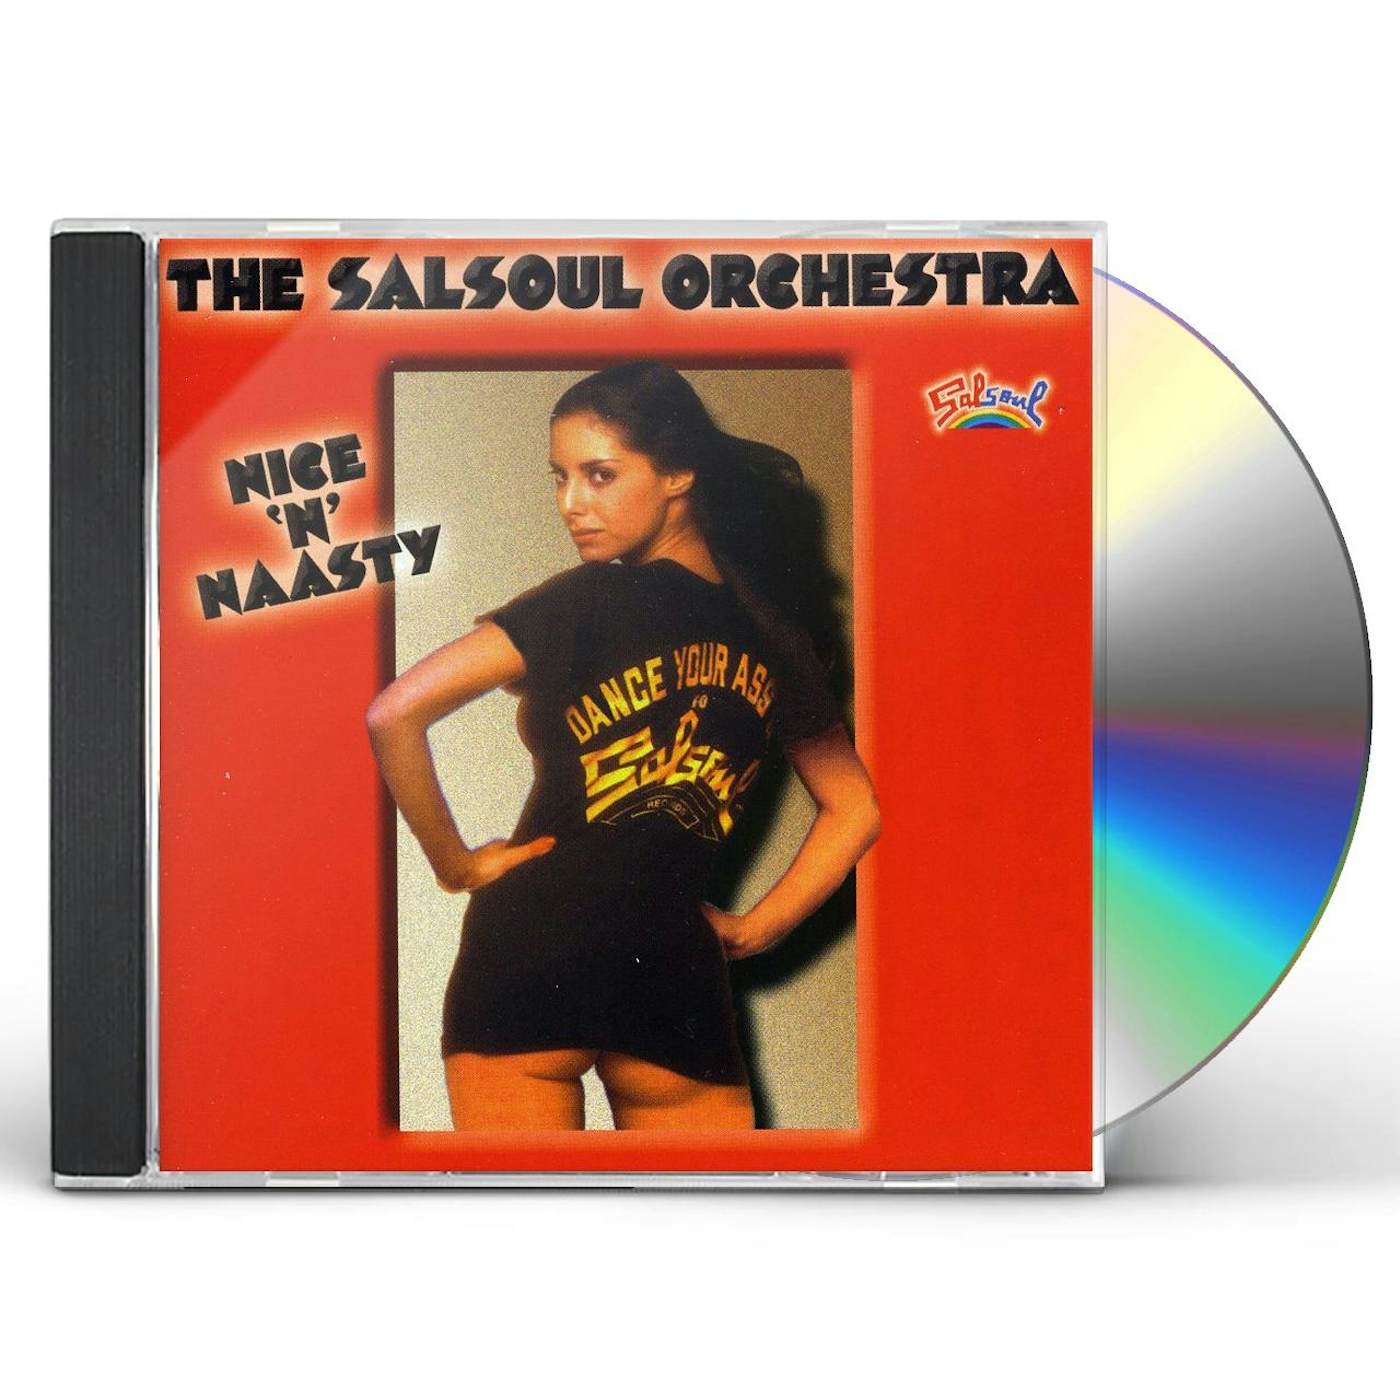 The Salsoul Orchestra NICE 'N' NAASTY CD